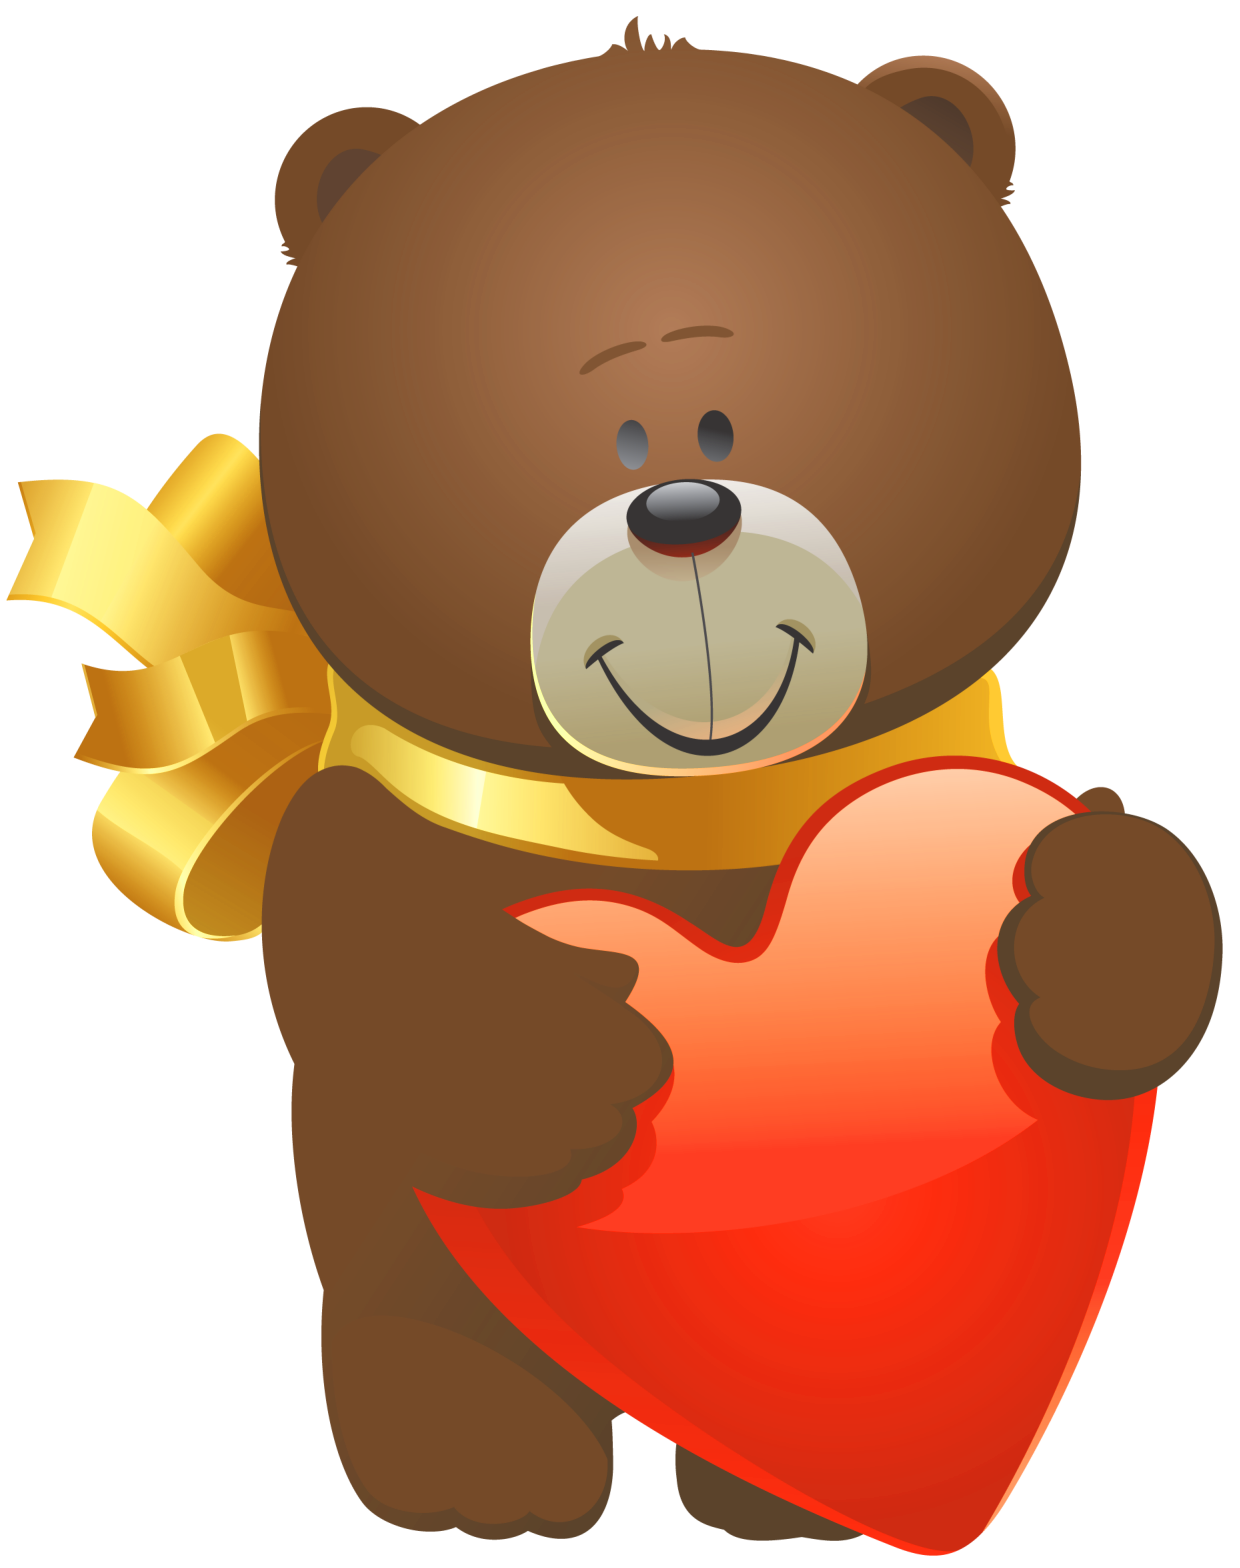 Valentine Teddy Bear PNG Clipart​ | Gallery Yopriceville - High-Quality  Free Images and Transparent PNG Clipart